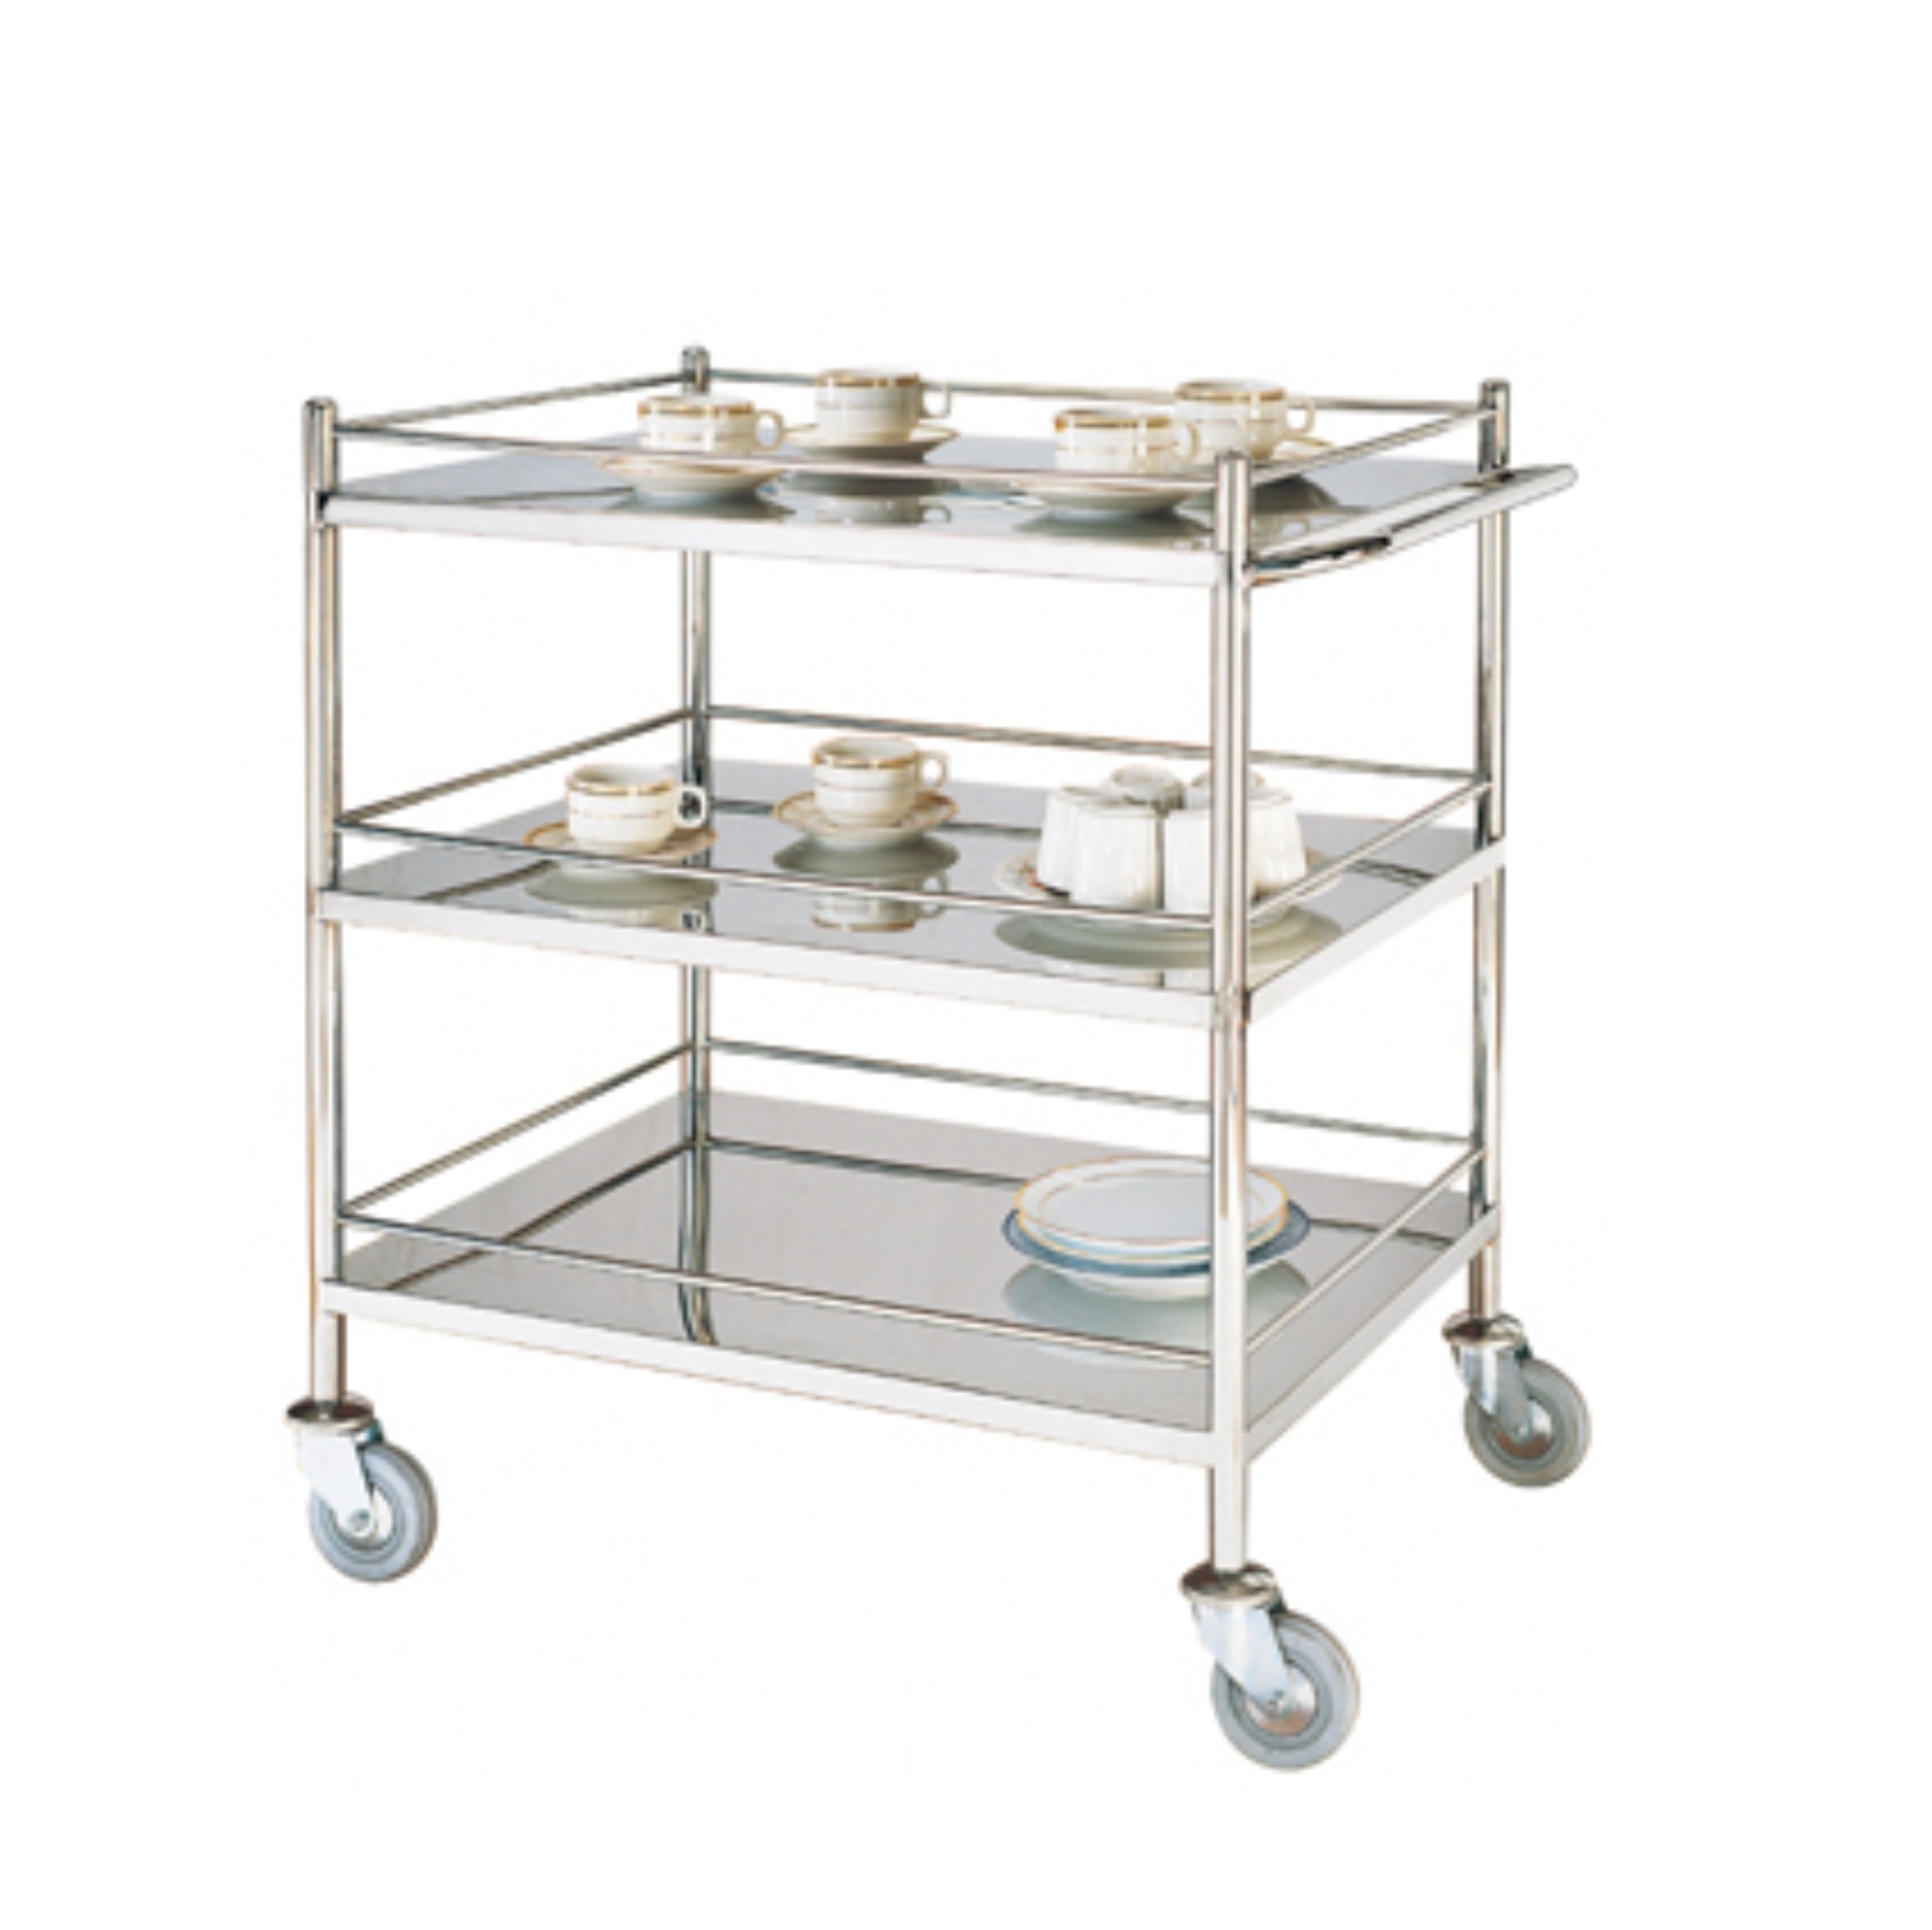 Stainless Steel Hotel Service Cart/Restaurant Service Trolley (FW-27)